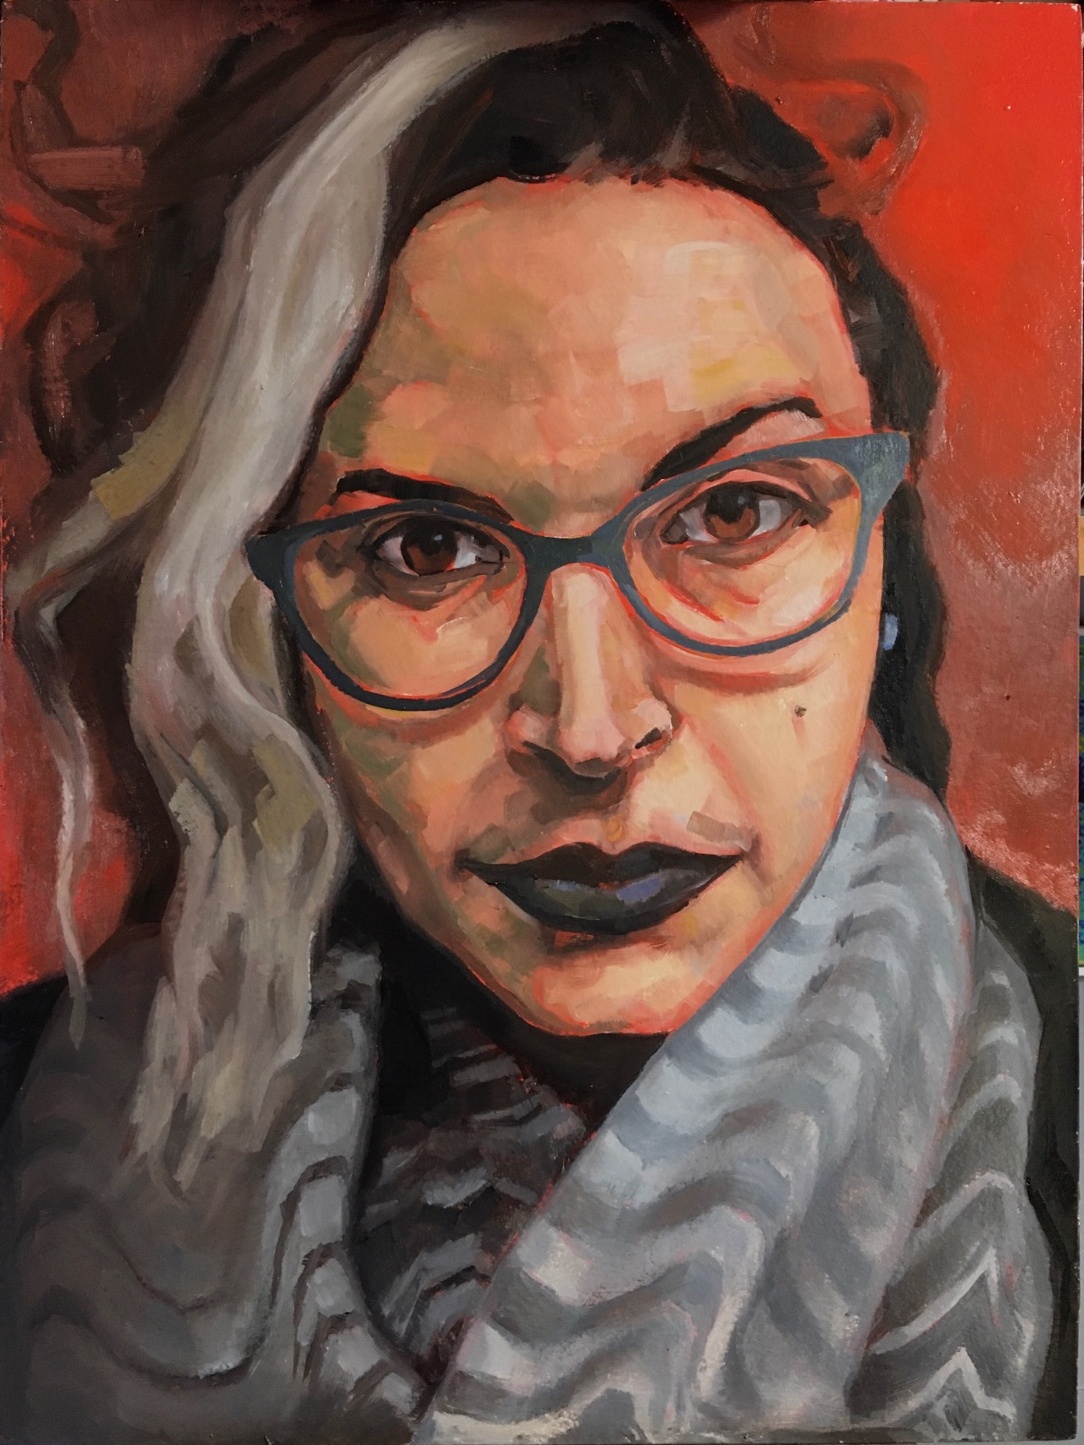 In this painted portrait, the author, a genderqueer Palestinian person with long wavy black hair with a pale streak in front, is staring directly at the viewer from against a fiery orange background. They are wearing large horn-rimmed glasses and a grey and black rippled scarf. Their turquoise stud earring is visible on the right ear.